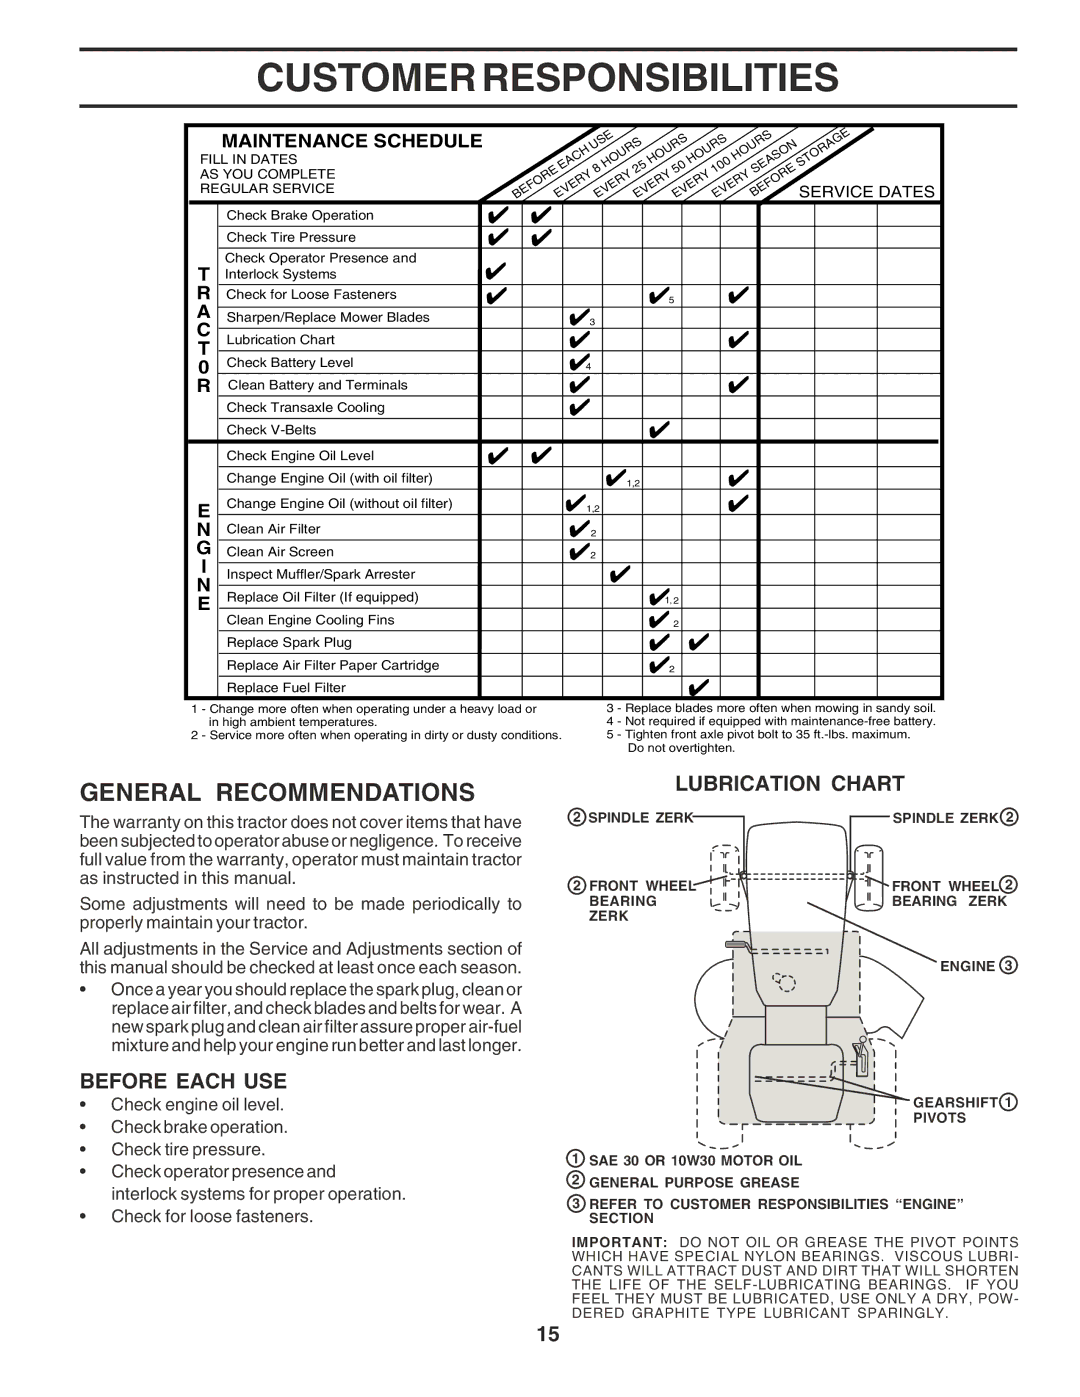 Poulan PR1842STC owner manual General Recommendations, Lubrication Chart, Before Each USE 